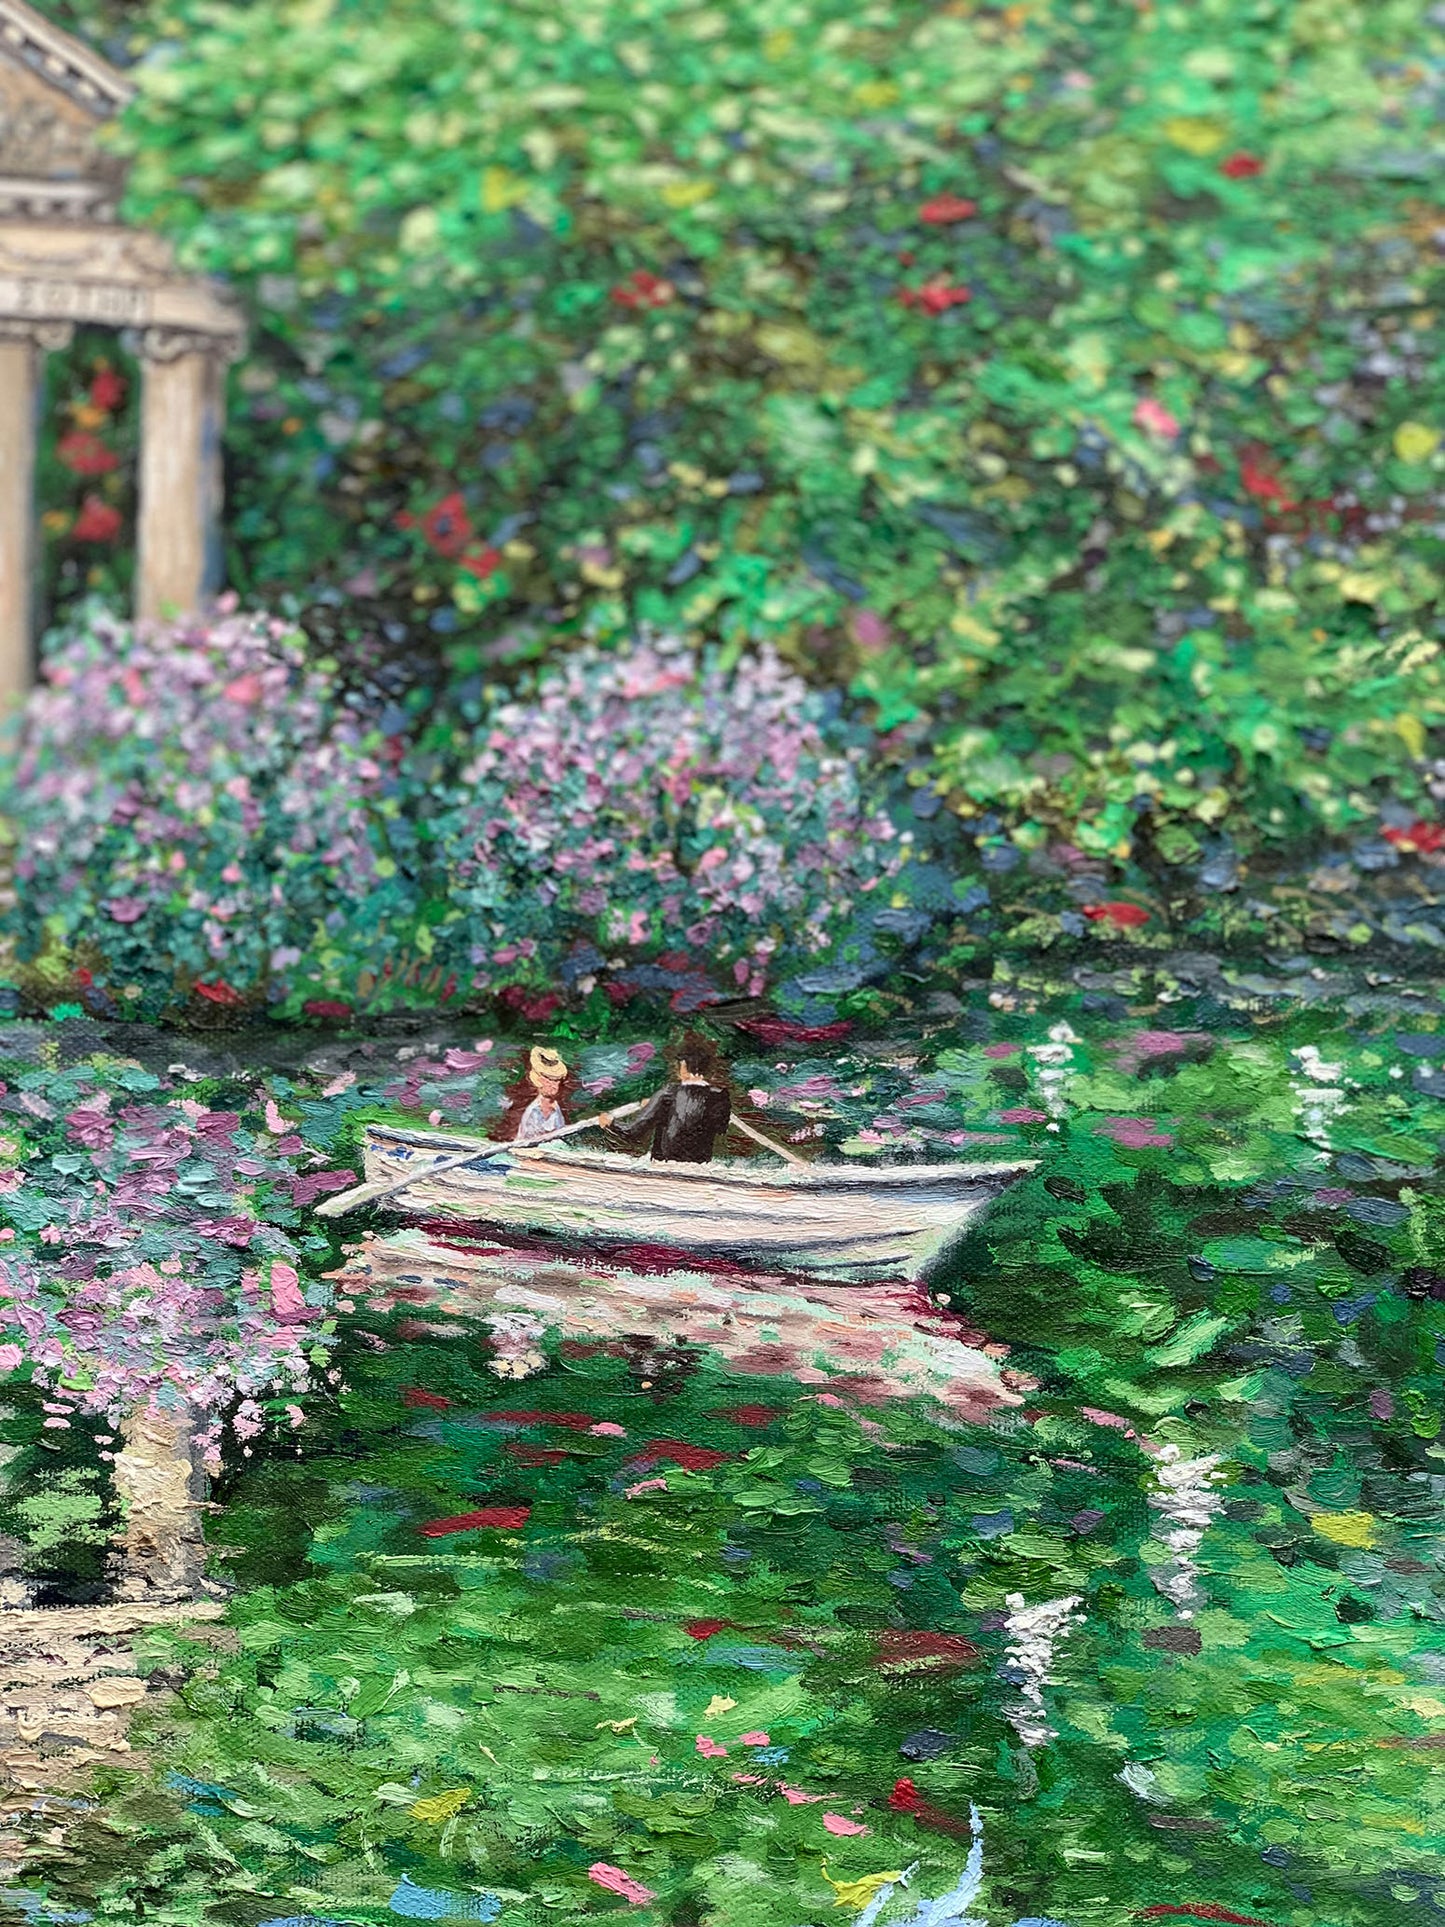 Original Painting: Lake with Row-Boats in Villa Borghese, Rome